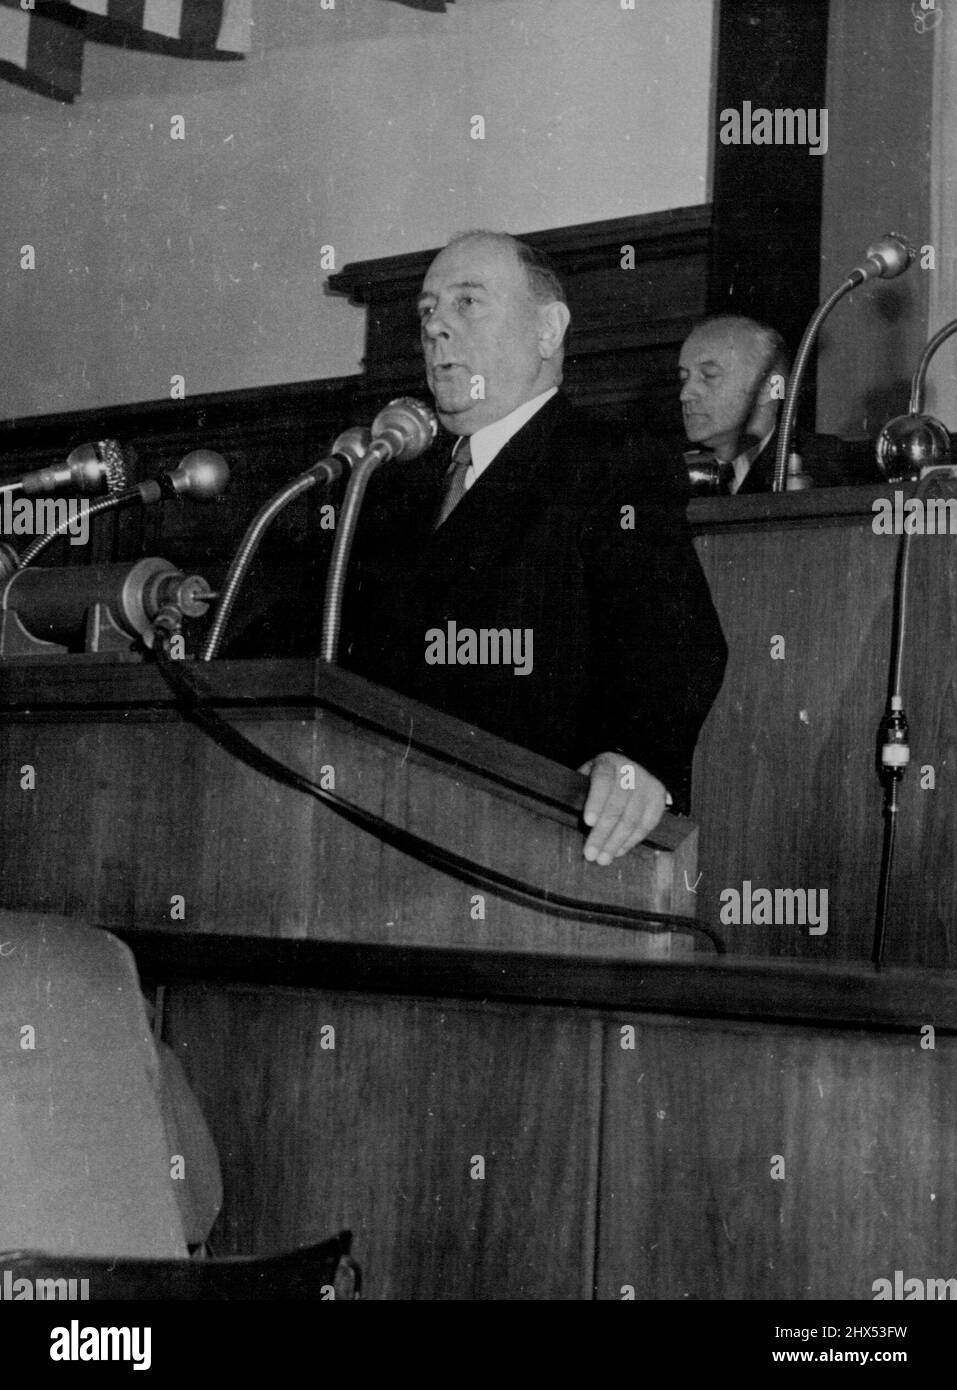 West Berlin's New Burgomaster -- Dr. Screiber makes his first official speech as the new Burgomaster of West Berlin when he addressed the house after his election. Dr. Walter Schreiber, Christian Democrat Acting Chief Burgomaster, was yesterday elected Chief Burgomaster of West Berlin in succession to the later Professor Reuter. He defeated Dr. Suhr, Social Democratic Candidate, by 62 votes 57. Dr. Schreiber, a left wing liberal, was Prussian Minister of State and Minister for trade until the dissolution of his party by Hitler. October 23, 1953. (Photo by Paul Popper). Stock Photo